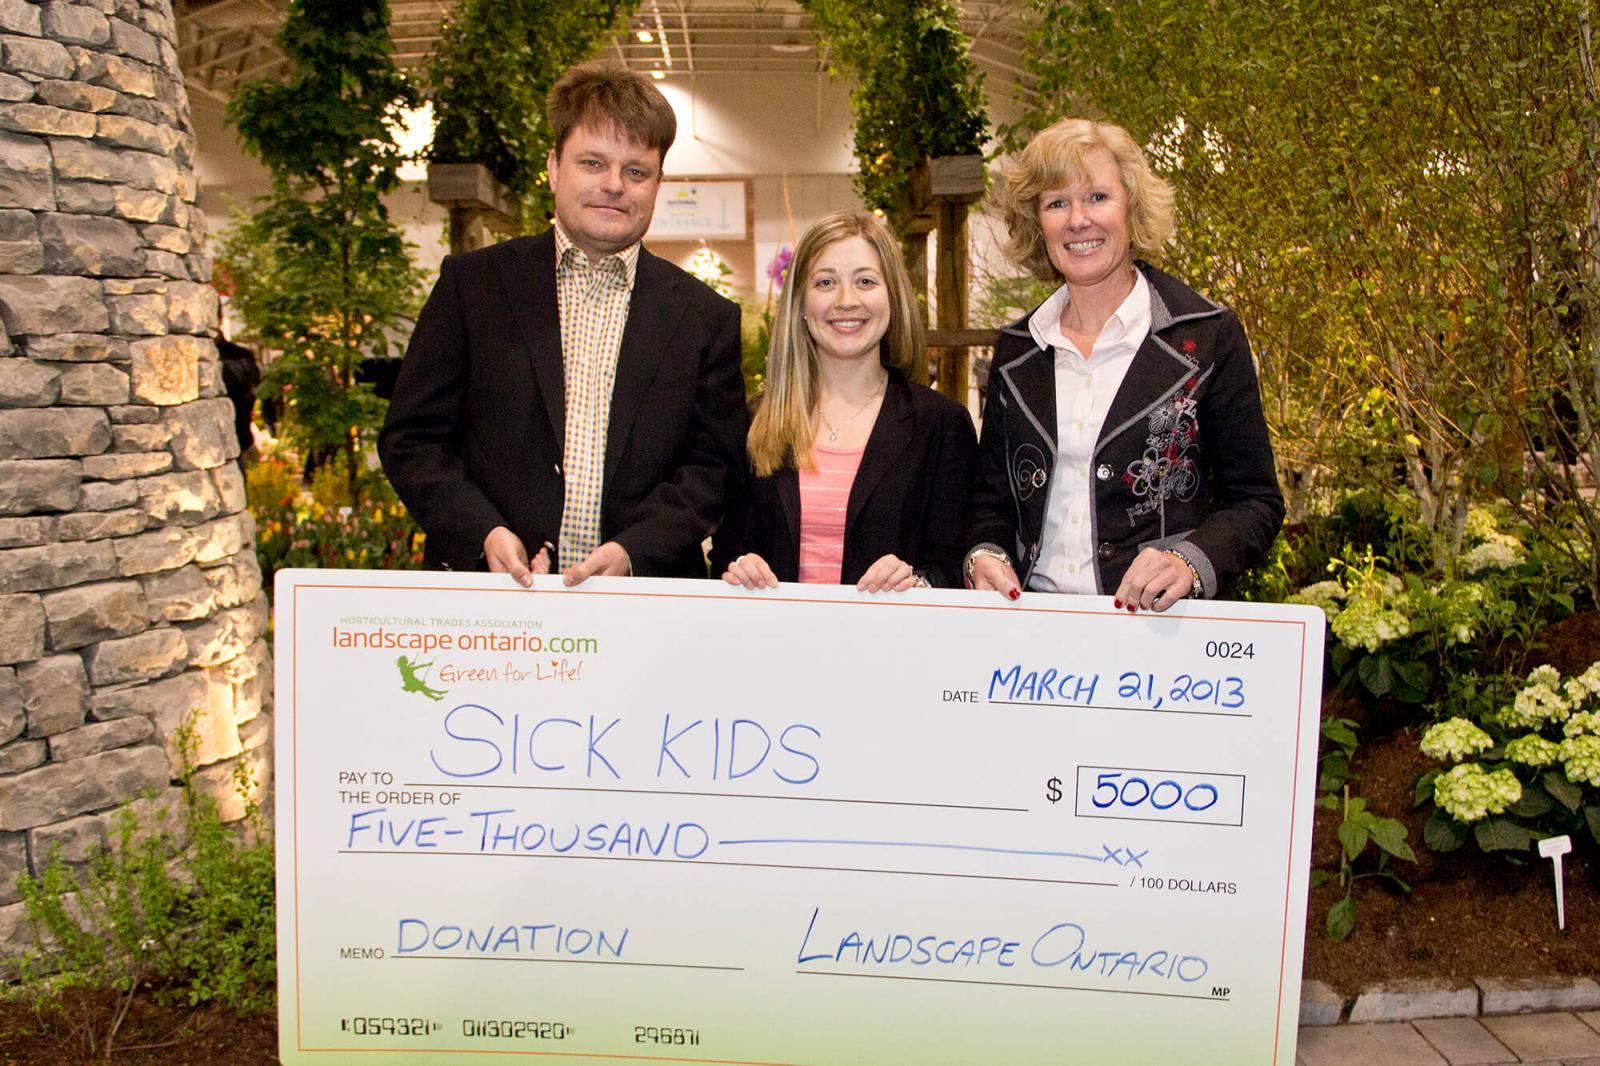 Arvils Lukss, Toronto Chapter president and Toronto Chapter past president Lindsay Drake Nightingale take time out during Canada Blooms to present Andrea Hoover, Child Life Department, Sick Kids (centre), with a $5,000 donation on behalf of the Chapter. Hoover plans to use the money to add an interactive component to the rooftop garden at the hospital by adding planting benches for children to monitor the growth rate of small plants and vegetables during their stay.